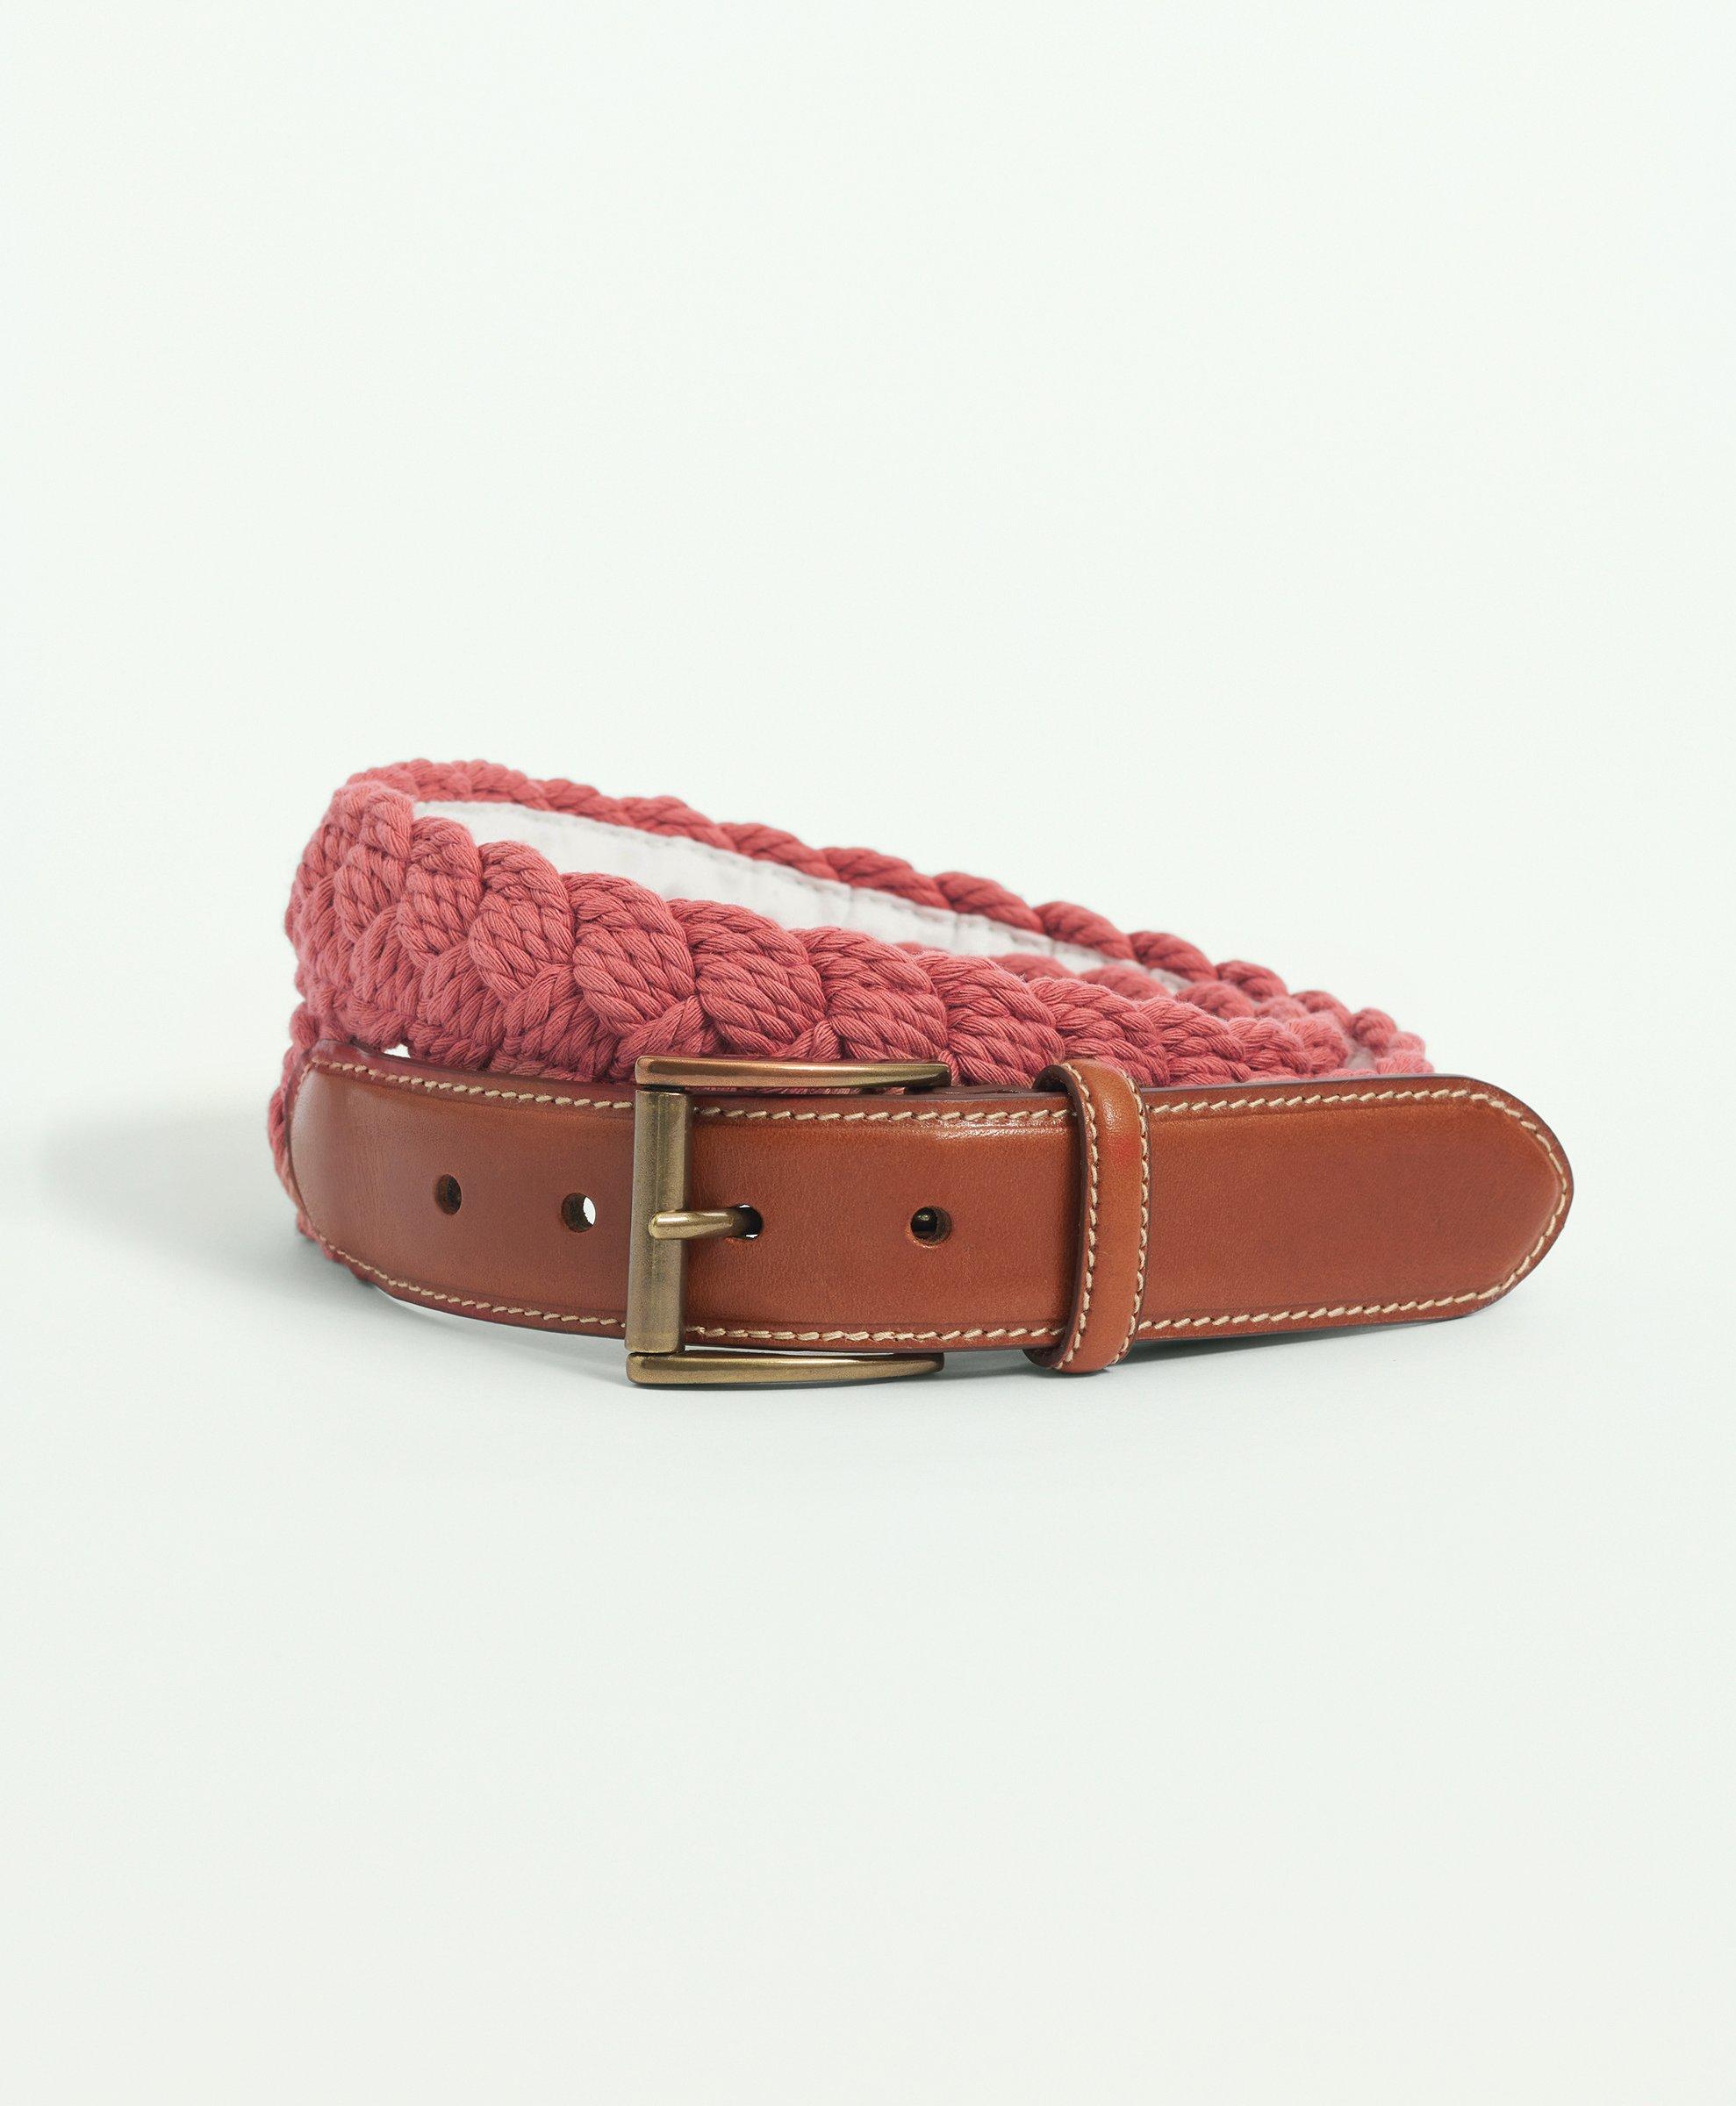 Brooks Brothers Braided Cotton Belt, Red, Size 32